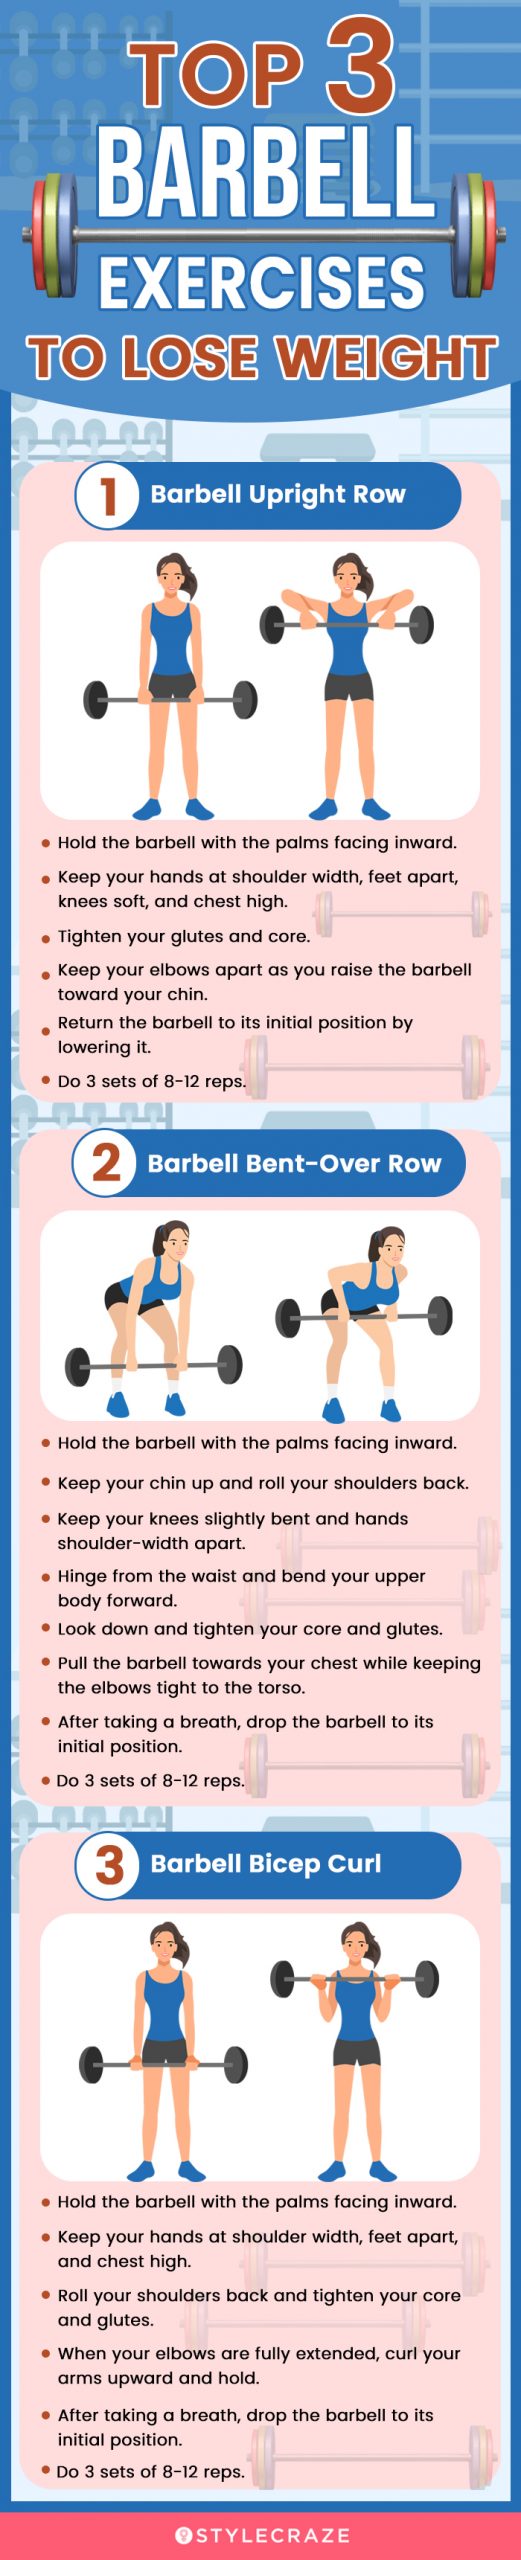 top 3 barbell exercises to lose weight (infographic)